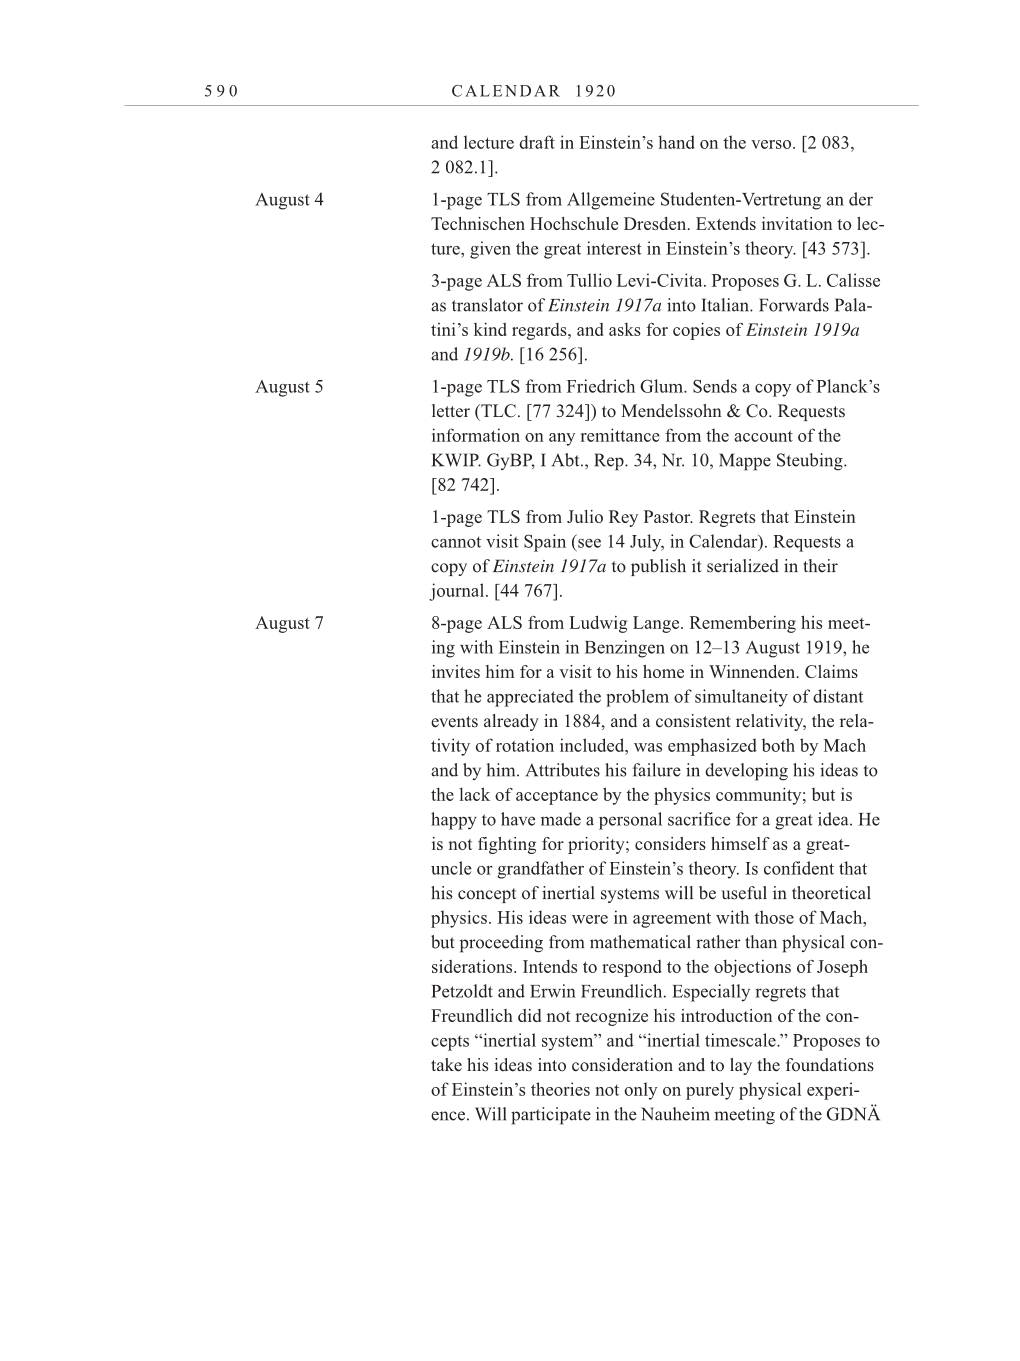 Volume 10: The Berlin Years: Correspondence May-December 1920 / Supplementary Correspondence 1909-1920 page 590